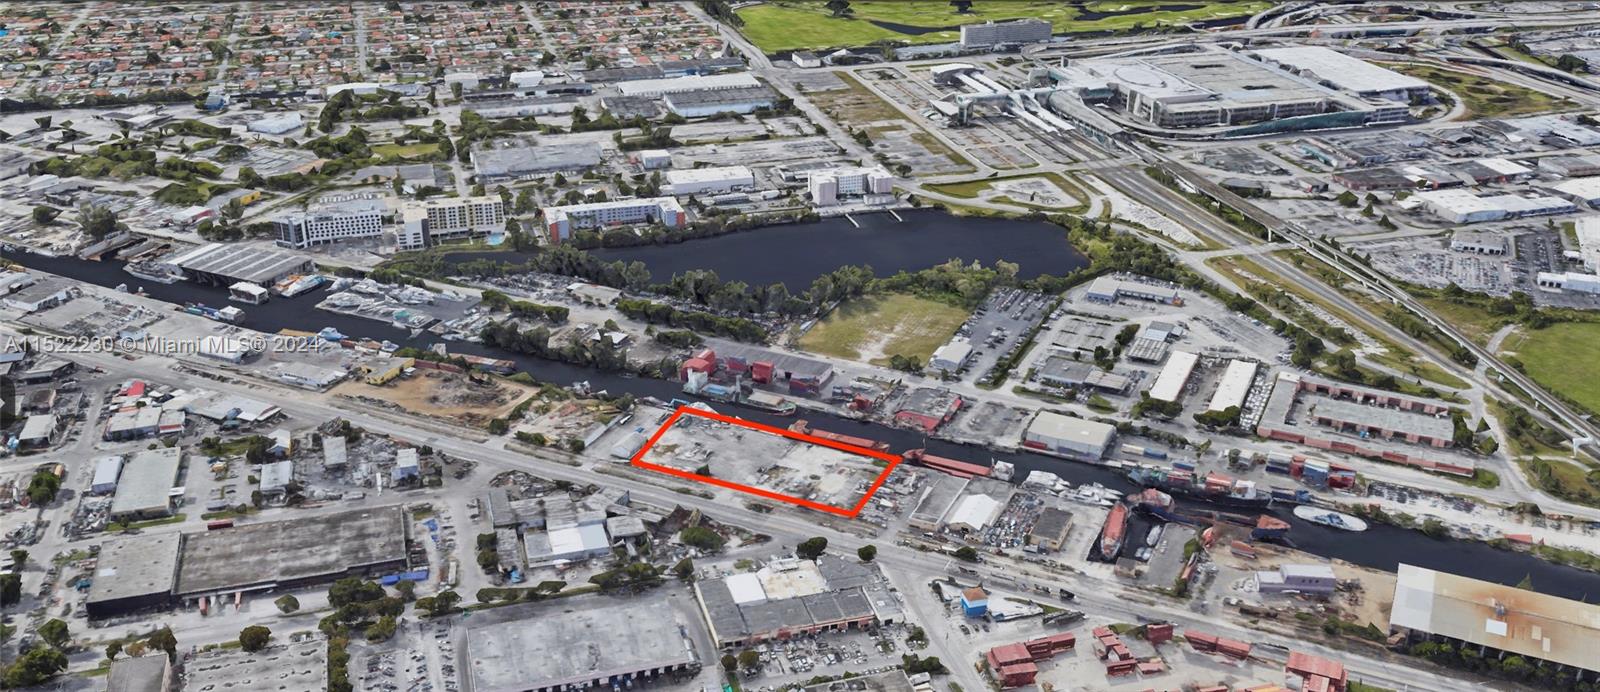 Available for lease 50,000-112,750 SF. Located directly on the Miami River. 2.4 Acres of Heavy Industrial zoned land.
+/440 linear feet of dockage and ramp. Easy access to all major highways. Strategically located east of Miami International Airport. Close proximity to the iconic Miami Jai Lai Casino.  Utilities on site.
Property can be easily subdivided.